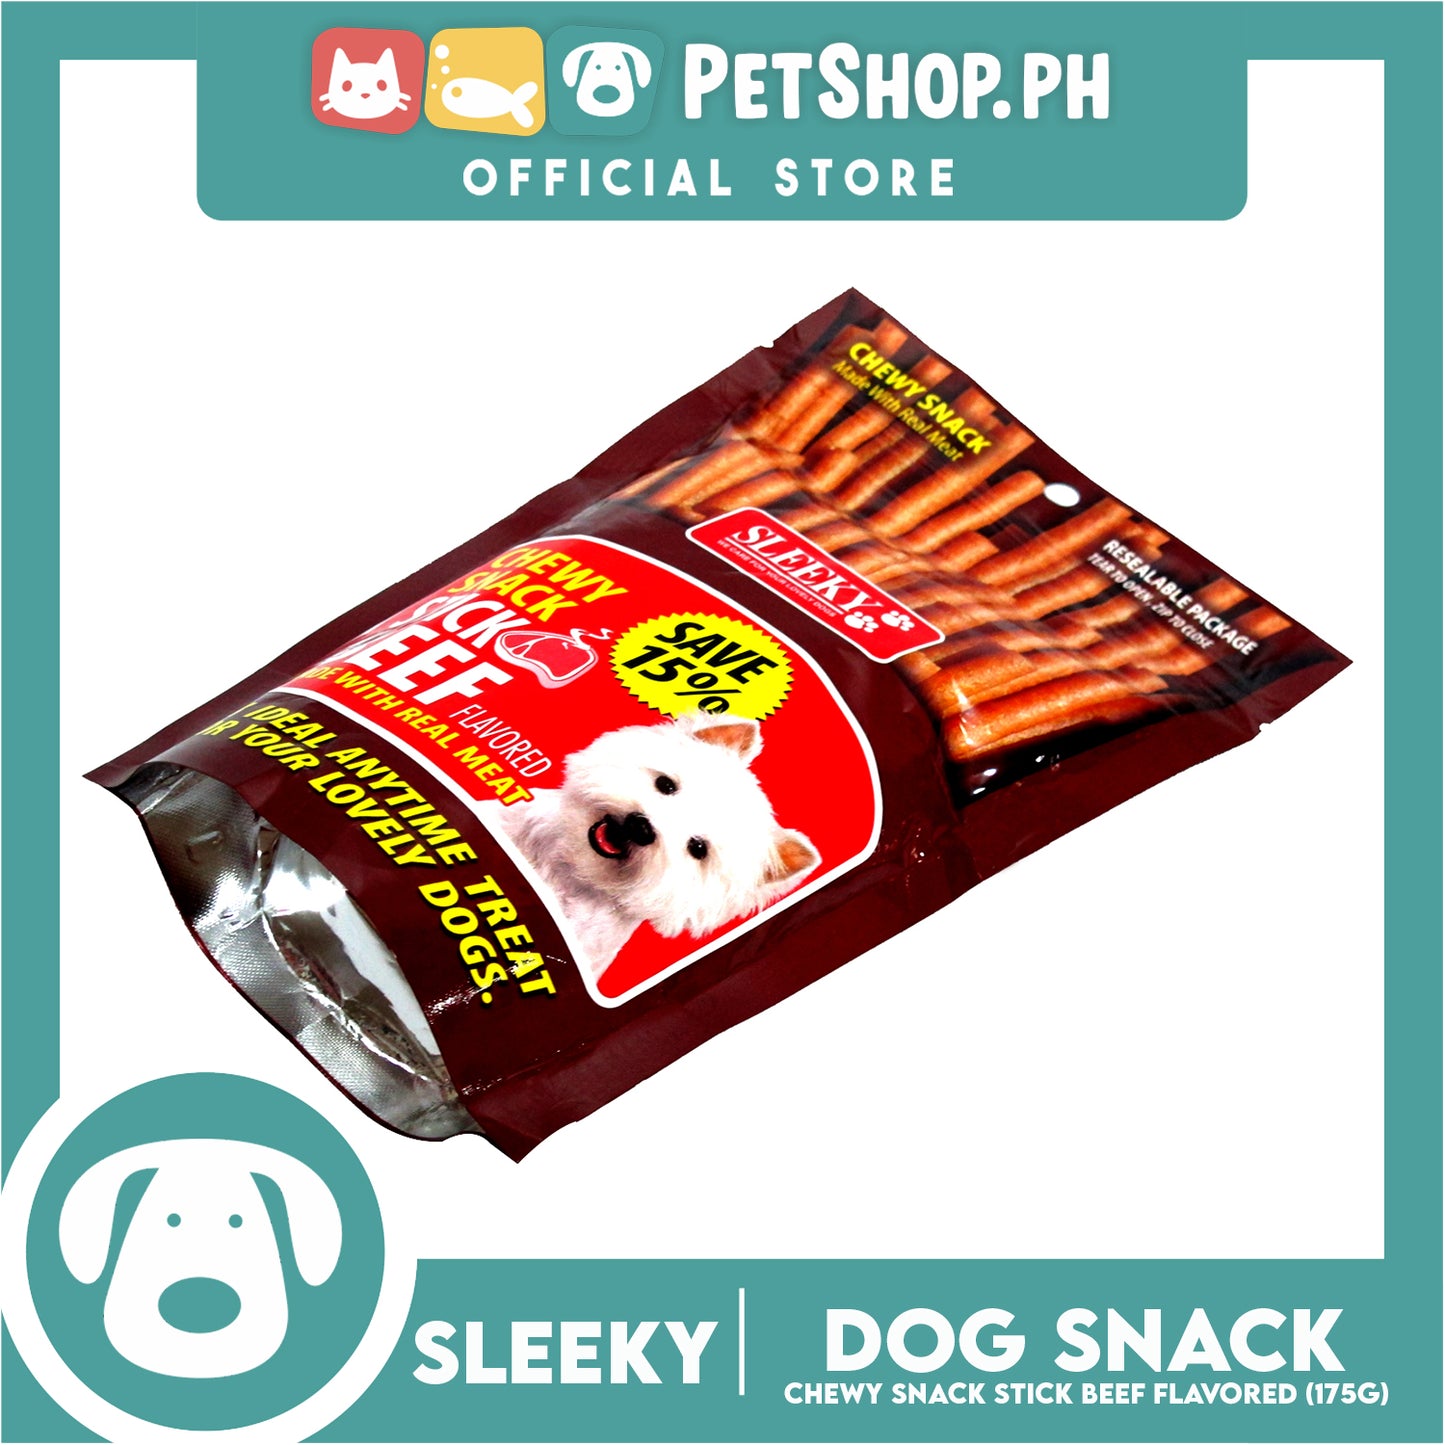 Sleeky Chewy Snack Stick Beef Flavored 175g Dog Treats